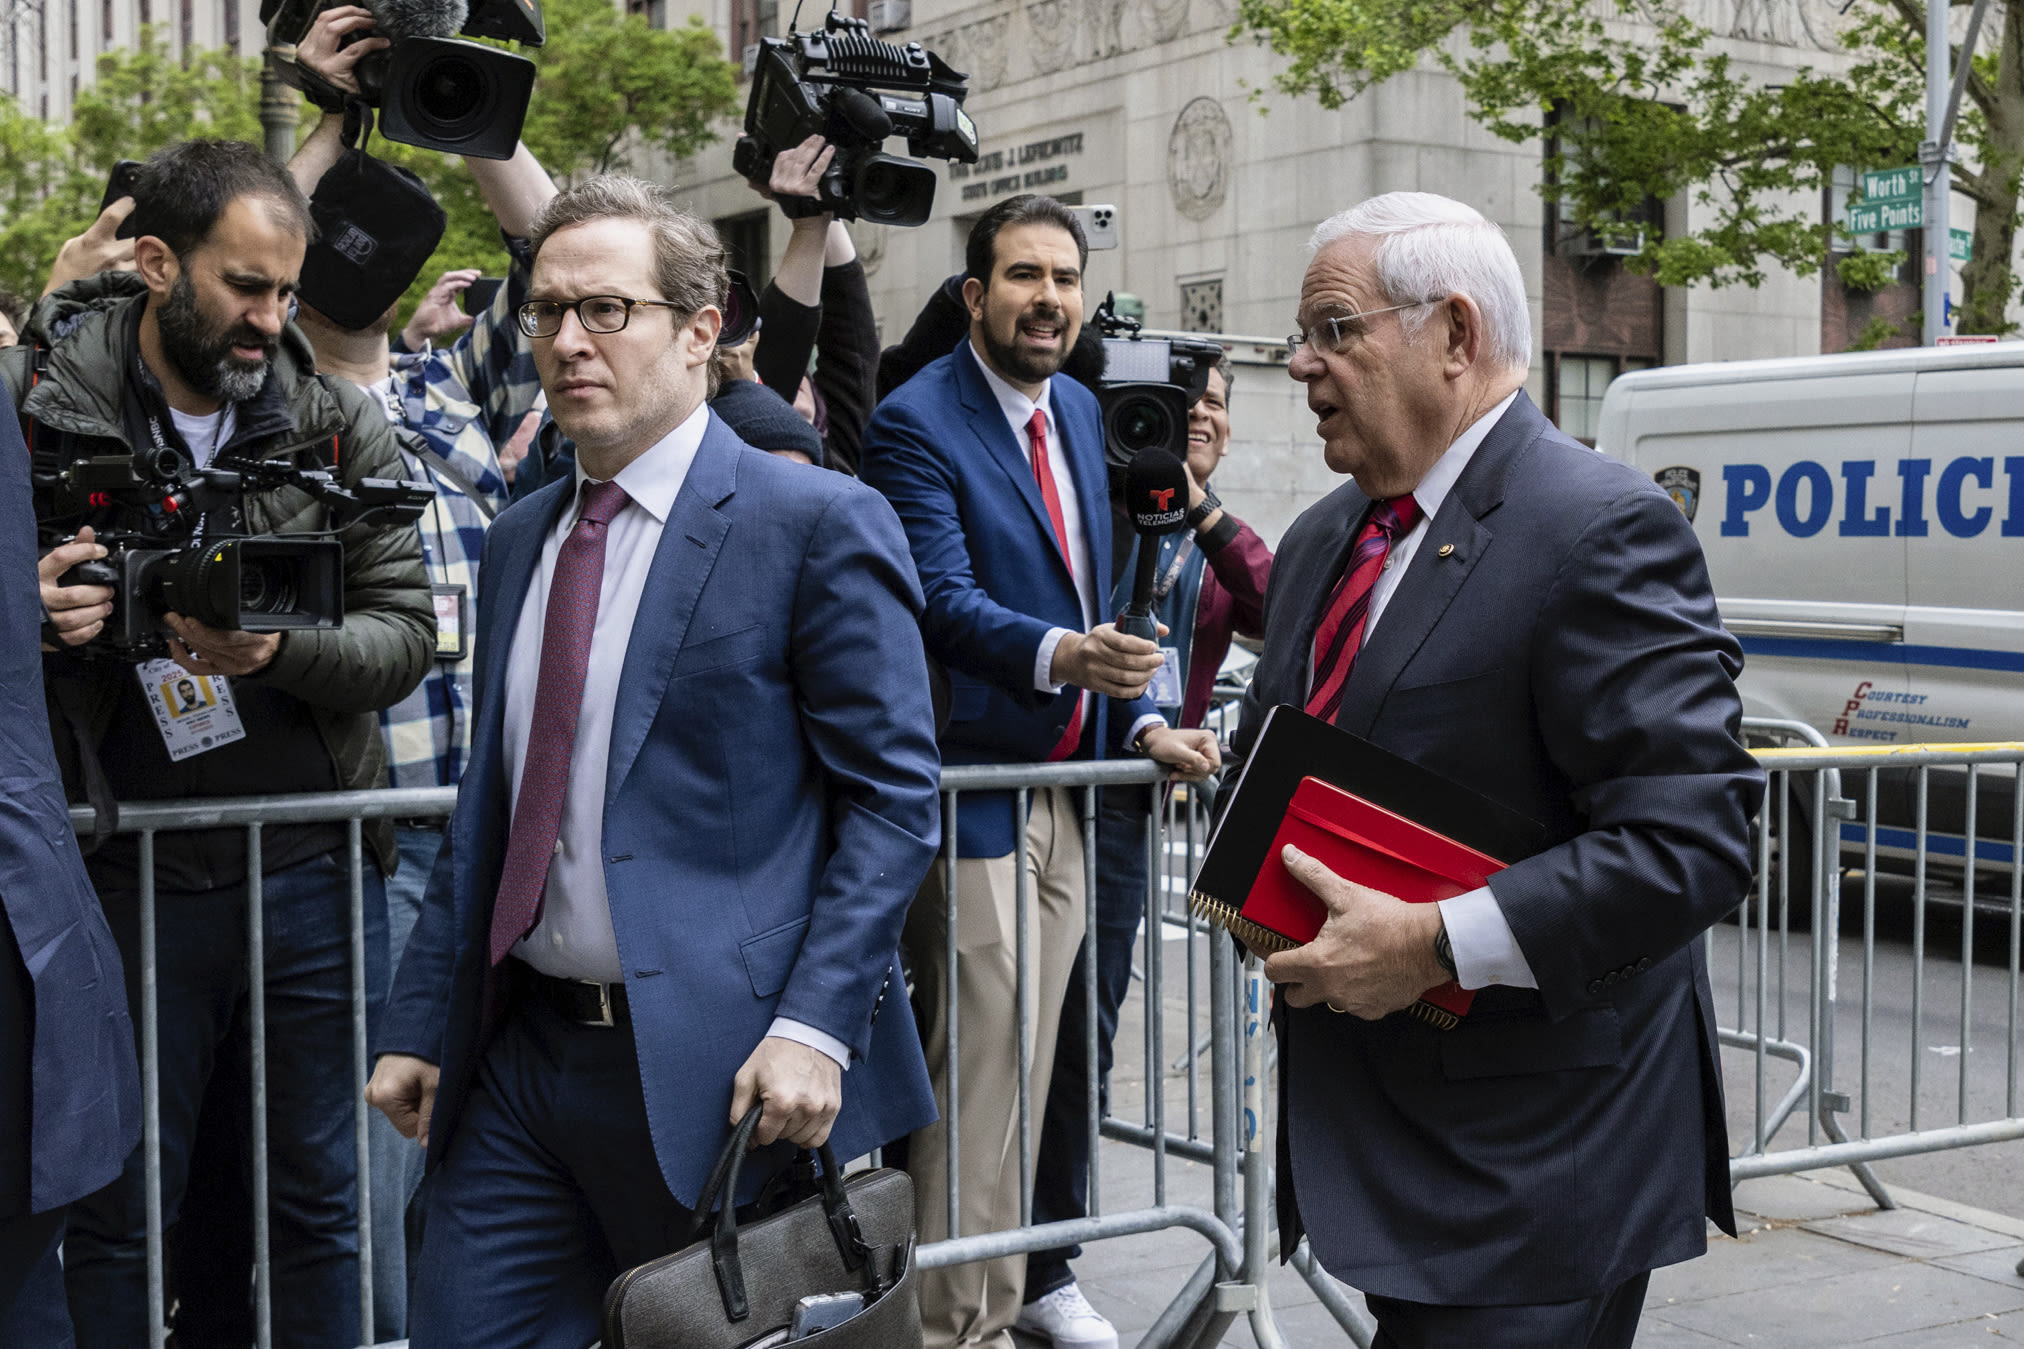 Menendez trial doesn’t have a full jury yet, but he’s not the main reason why